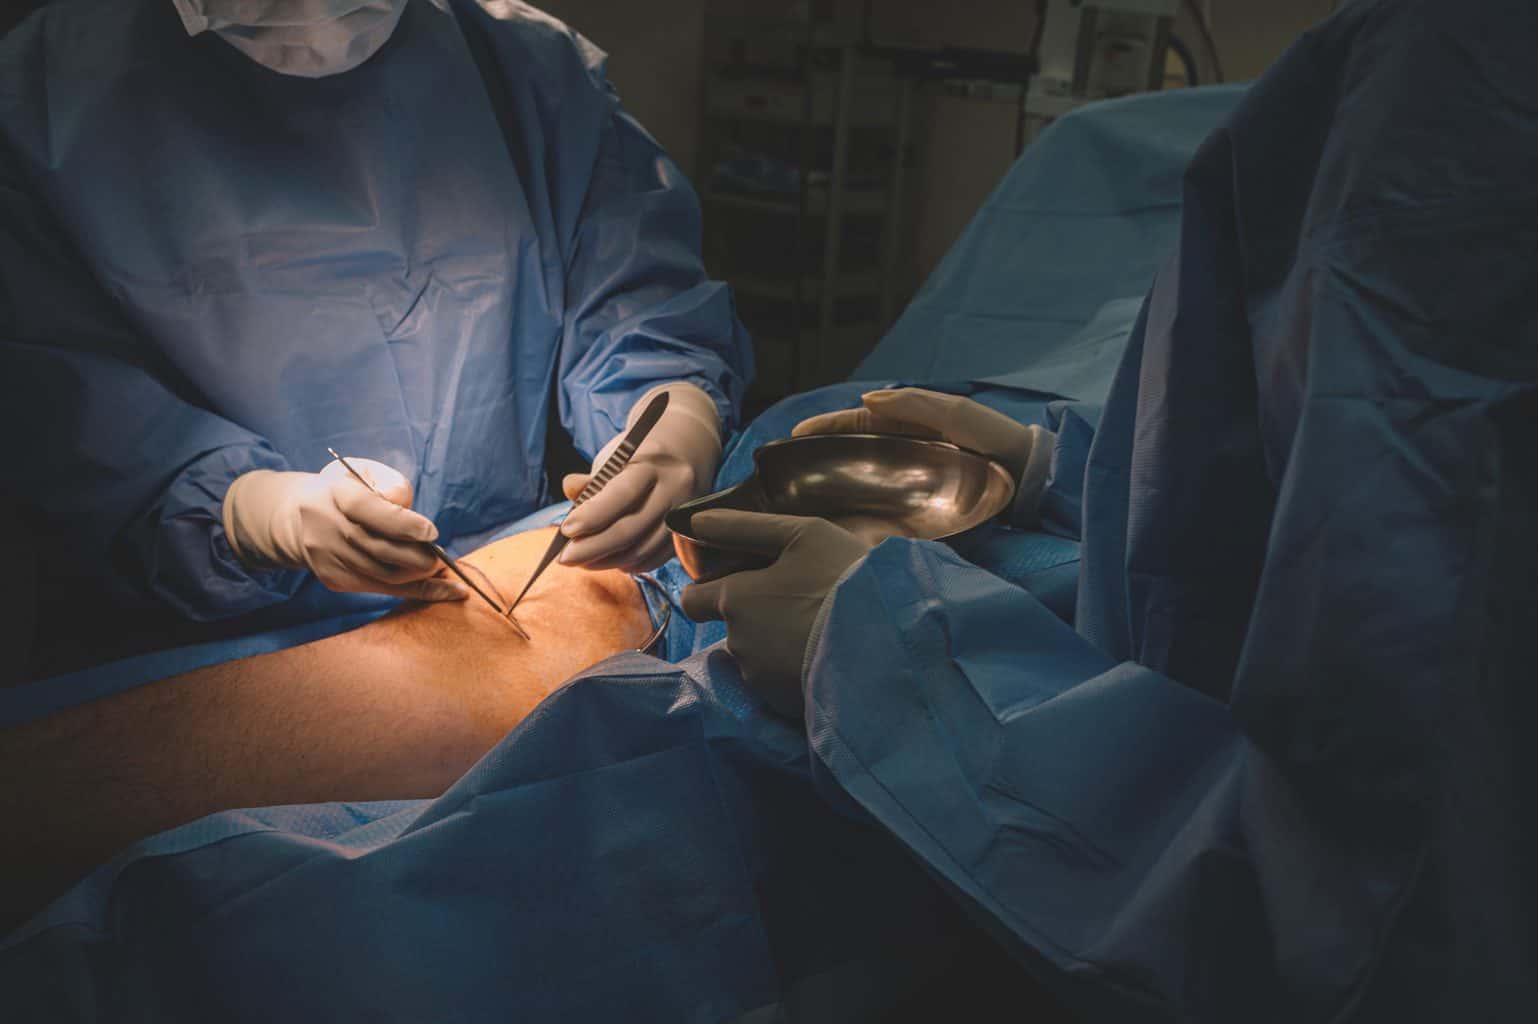 vascular surgeons in the operating theater, vein issues, vascular treatment, aortoiliac occlusive disease radiology, aortoiliac disease radiology, vein surgery